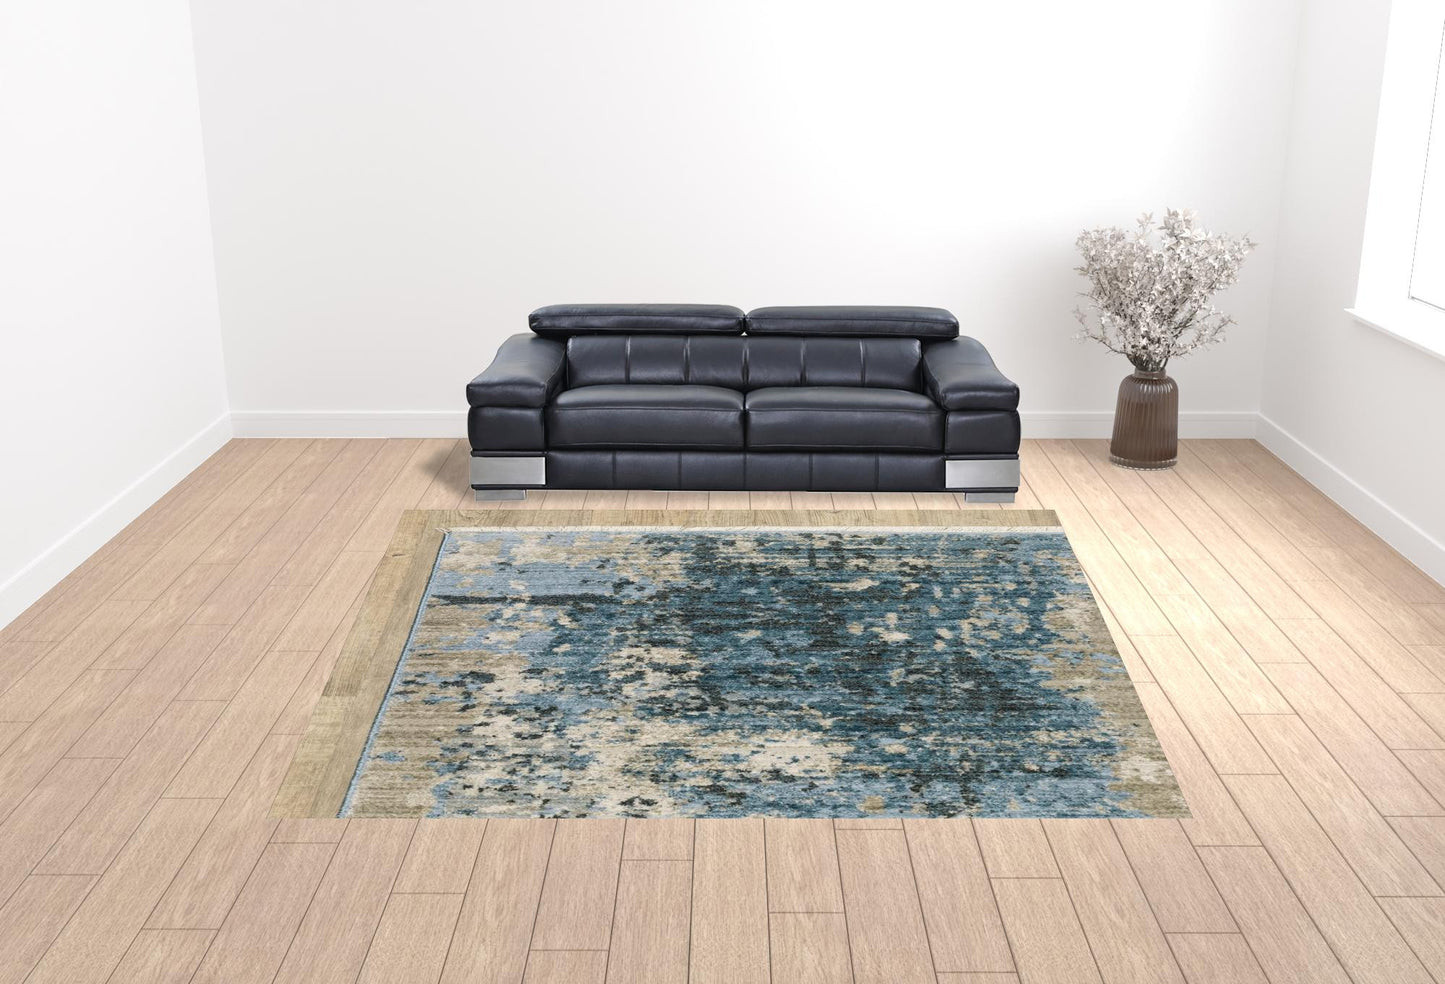 10' X 13' Blue Grey Ivory Light Blue And Dark Blue Abstract Power Loom Stain Resistant Area Rug With Fringe